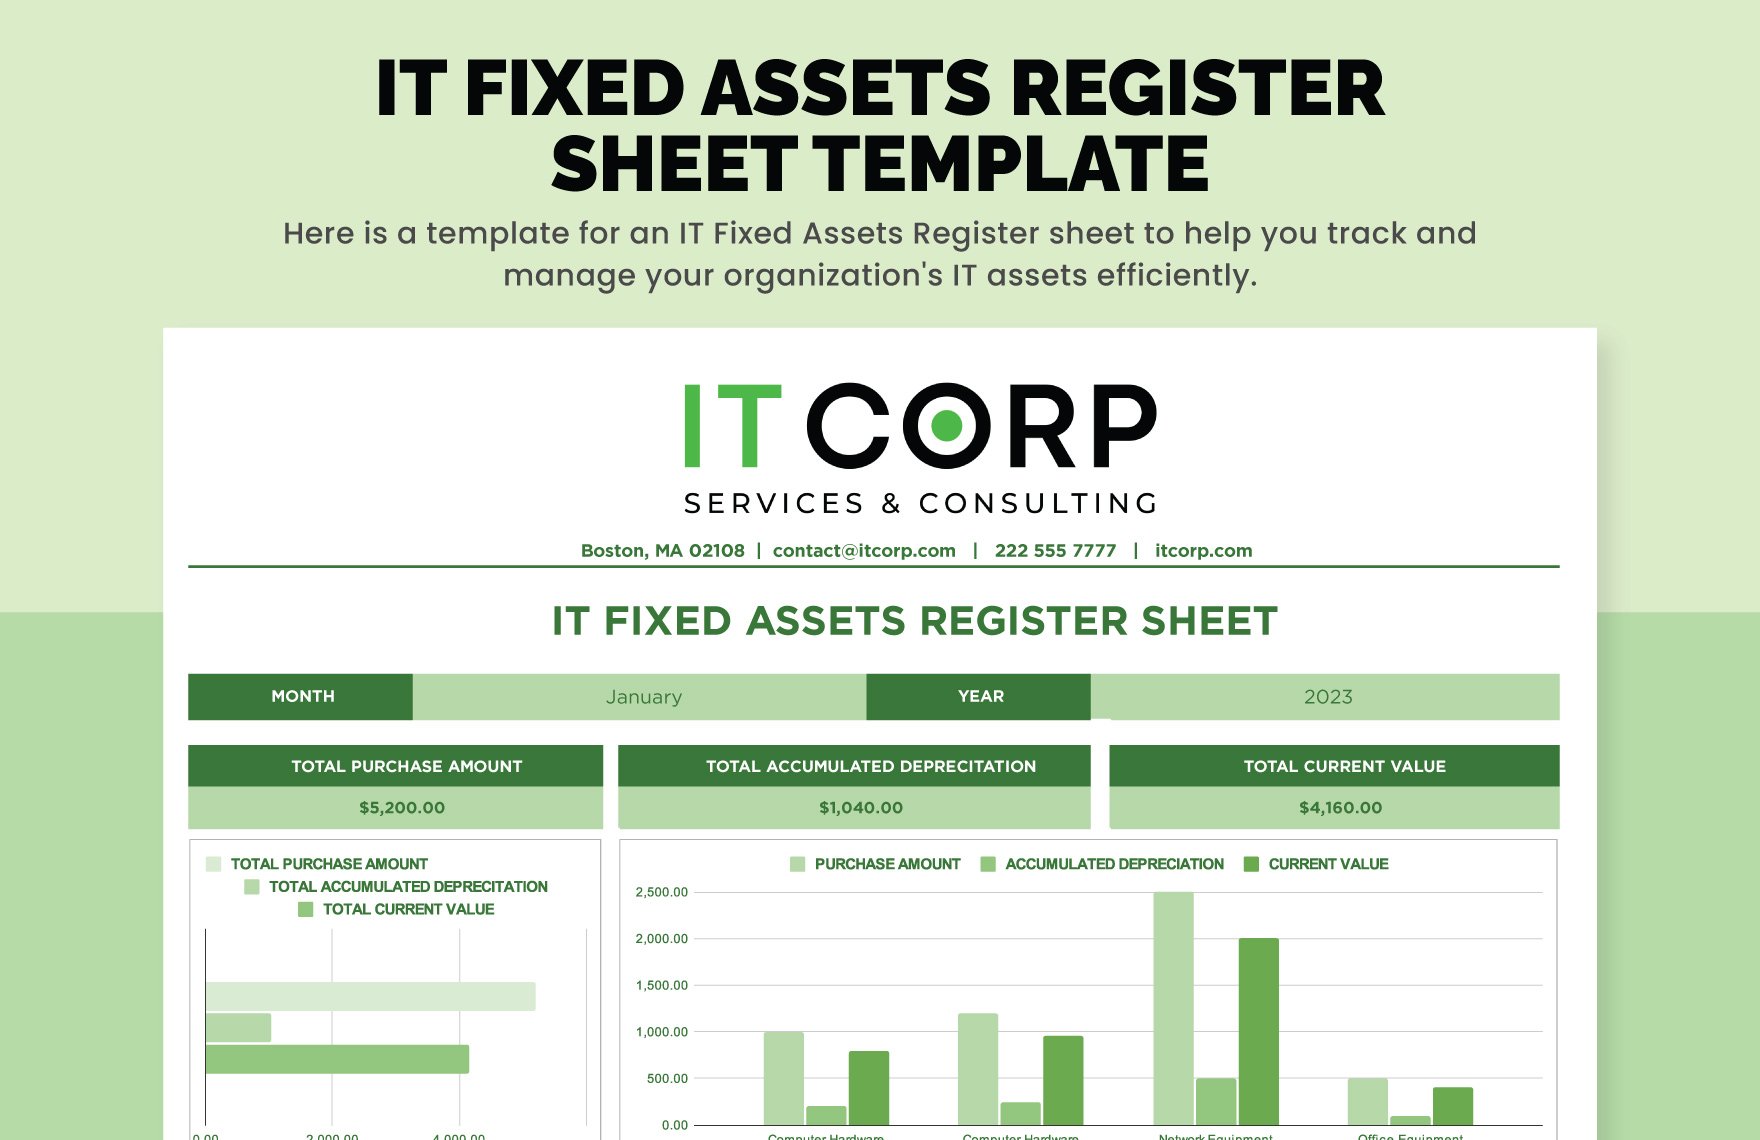 IT Fixed Assets Register Sheet Template in Excel, Google Sheets